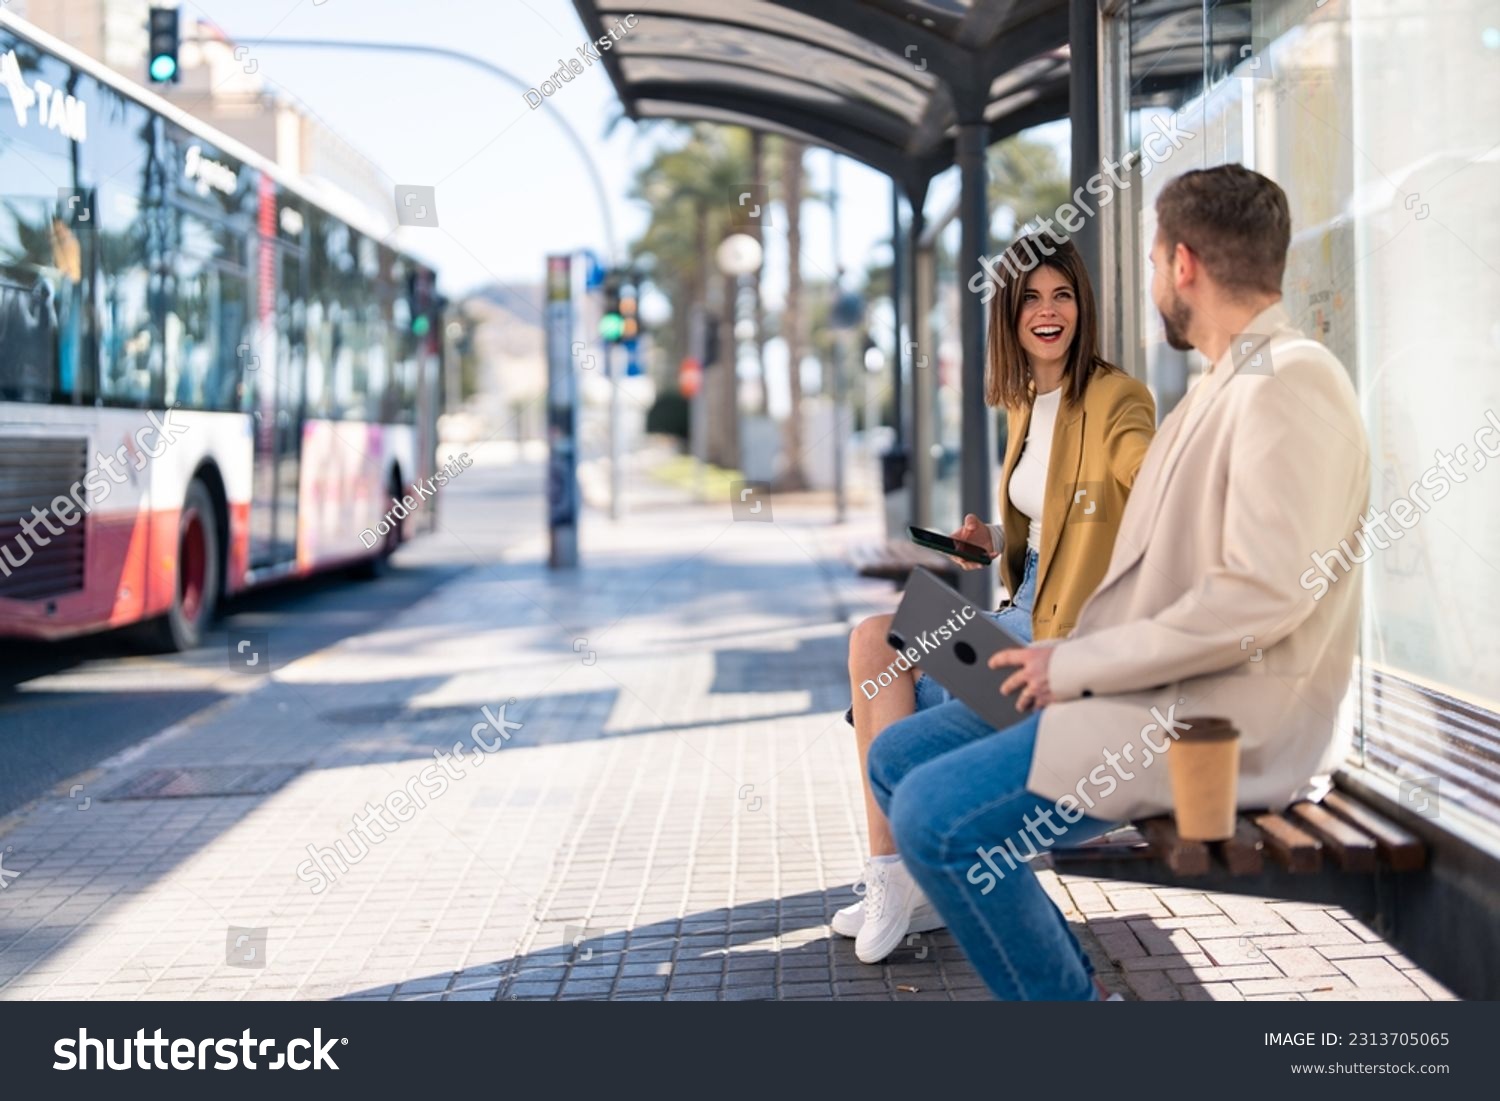 Two cheerful friends young woman and man sitting at bus station while city bus is passing by on the street, having a conversation, laughing, holding mobile phone and digital tablet. Copy space photo. #2313705065